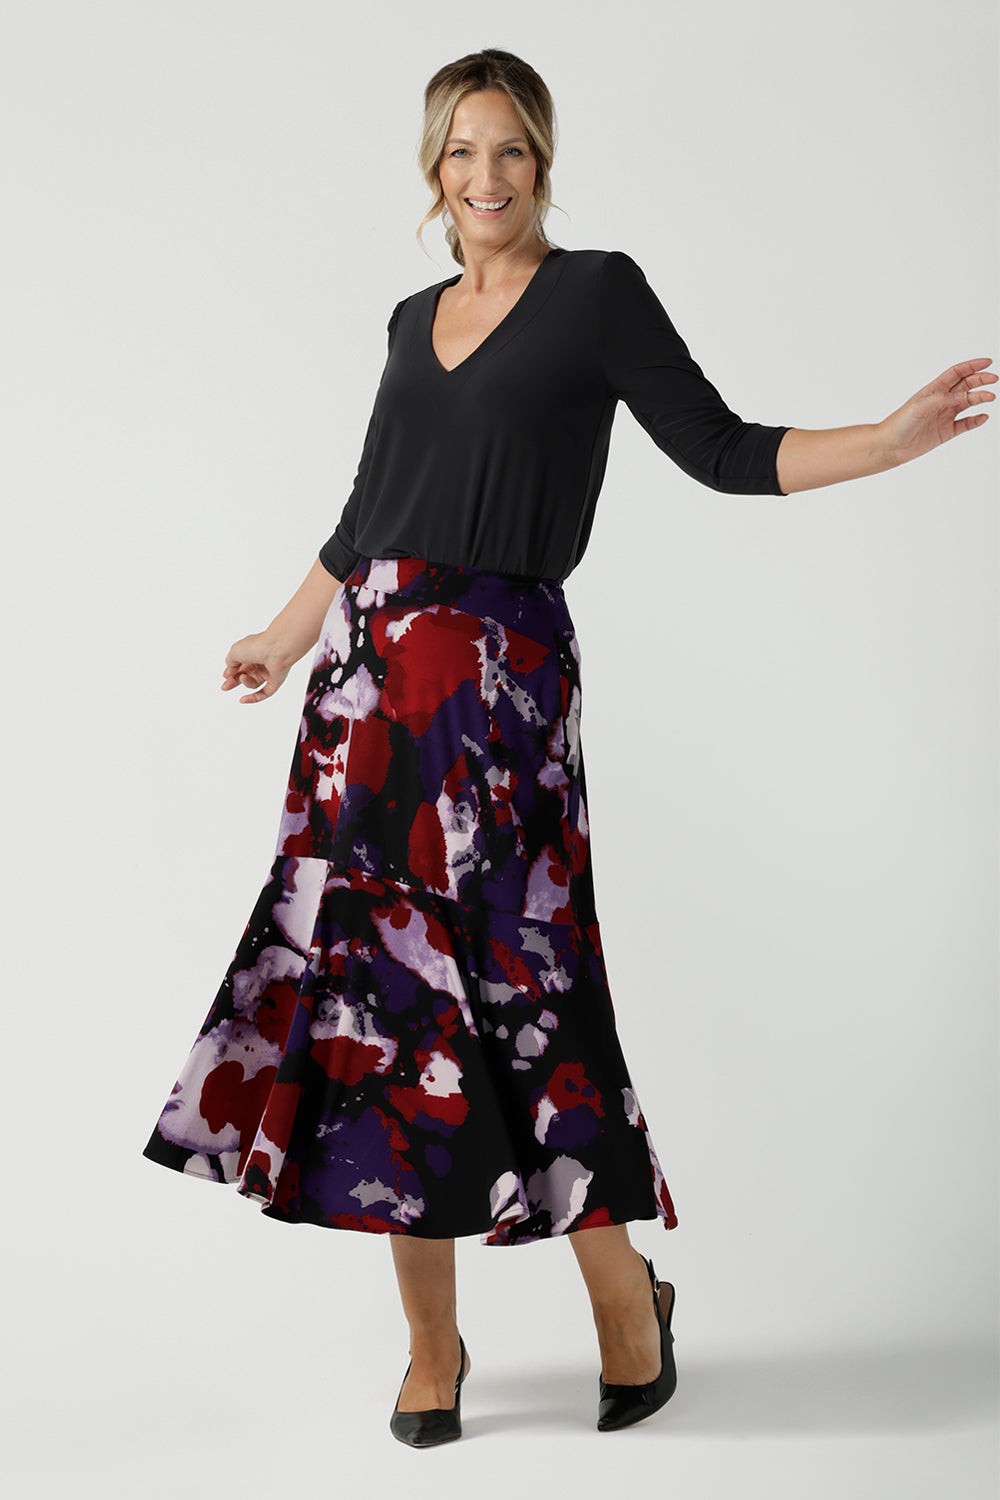 Size 10 woman wears the Berit Maxi skirt in the Fitzroy Print. Styled back with black pumps. Made in Australia for women size 8 - 24.